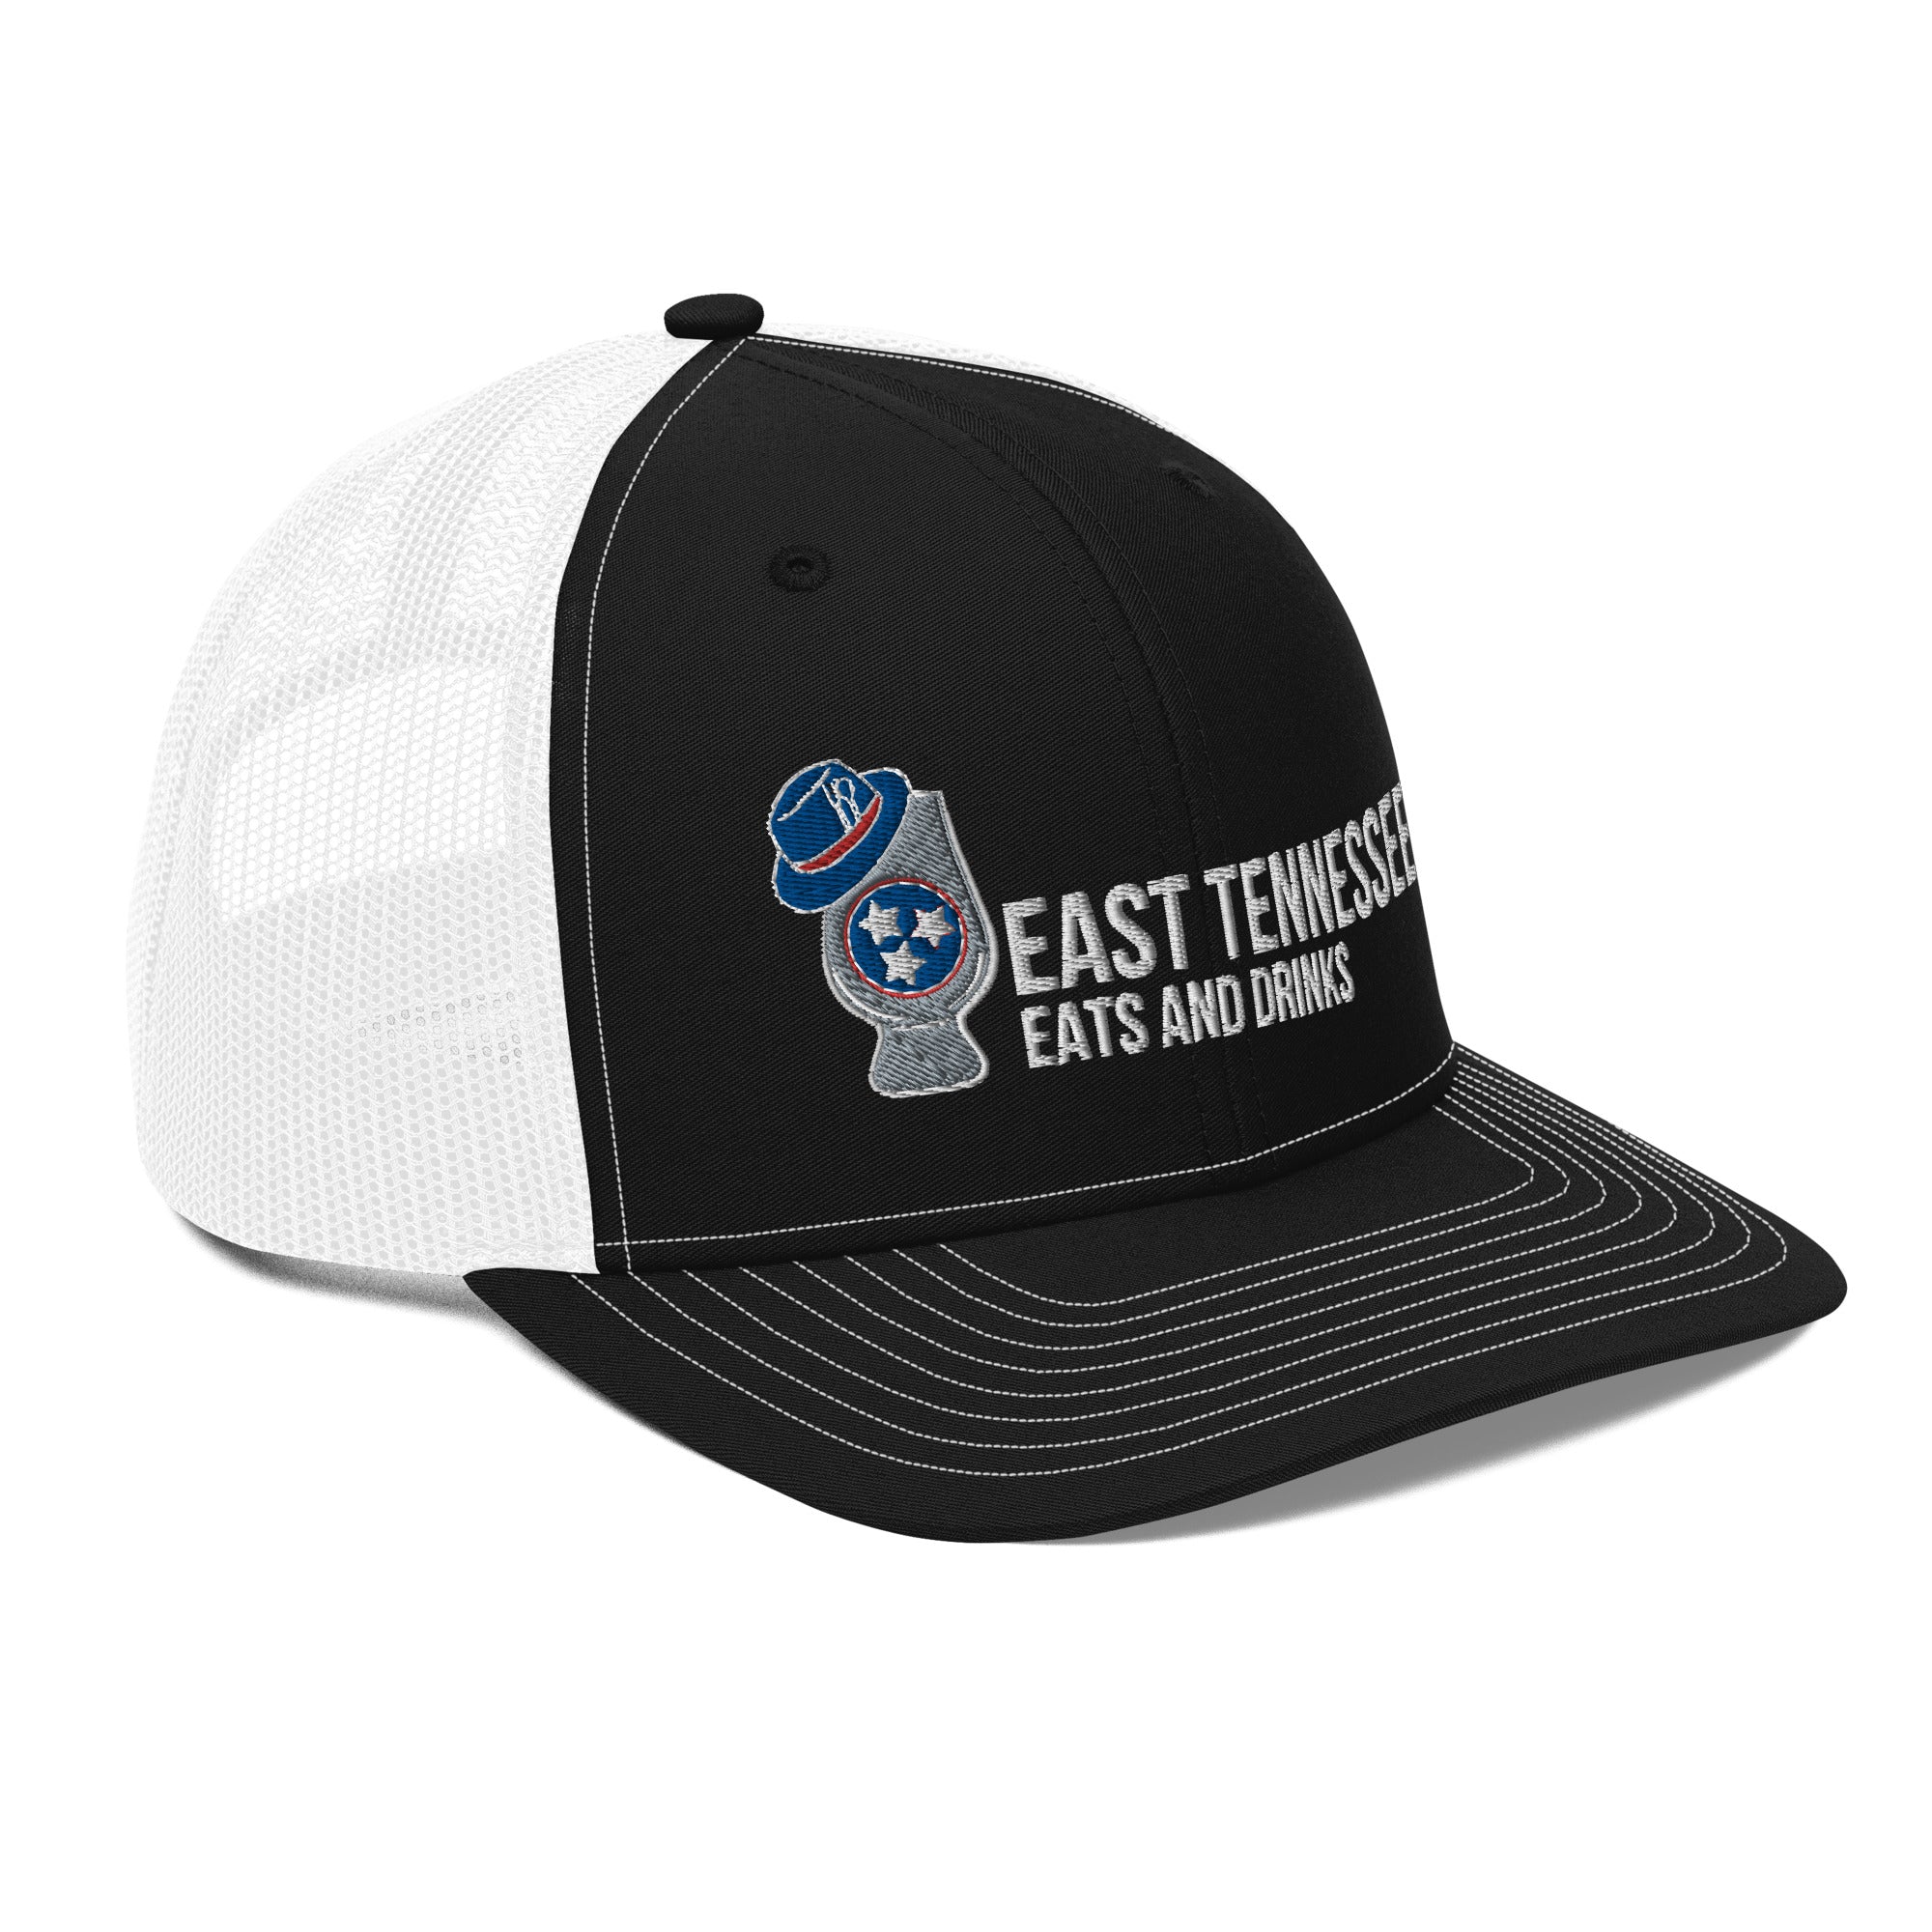 East Tennessee Eats and Drinks Trucker Cap - Richardson